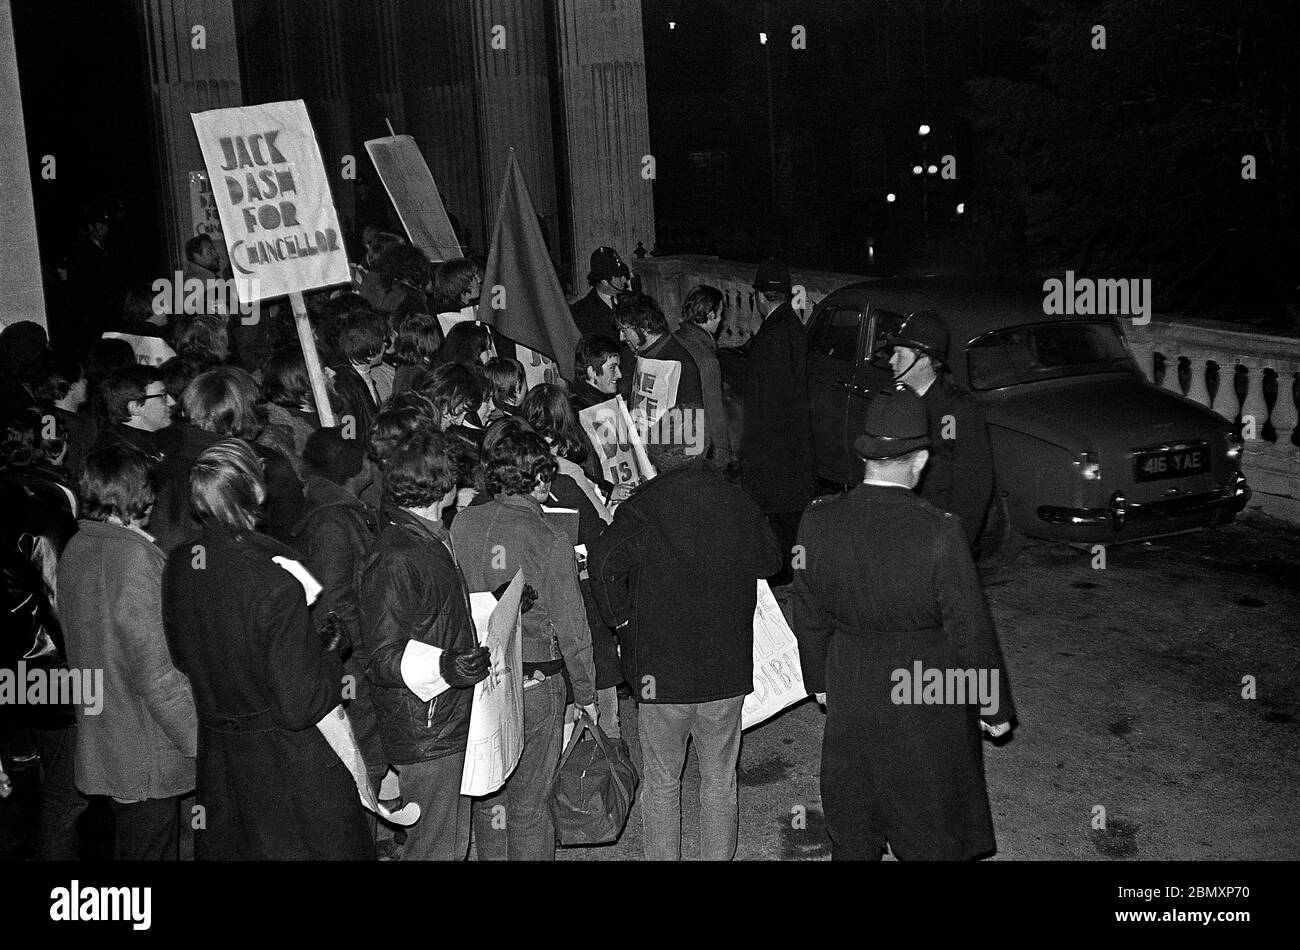 Demonstrators protesting against the Duke of Beaufort being Bristol University Chancellor picket outside the Victoria Rooms as he arrives for Op Soc’s Gala Performance of Offenbachs “La Grande-Duchesse de Gerolstein” on 14 February 1969.  Some placards called for the Duke to be replaced by Jack Dash, a communist trade union leader prominent in London Dock Strikes. Stock Photo